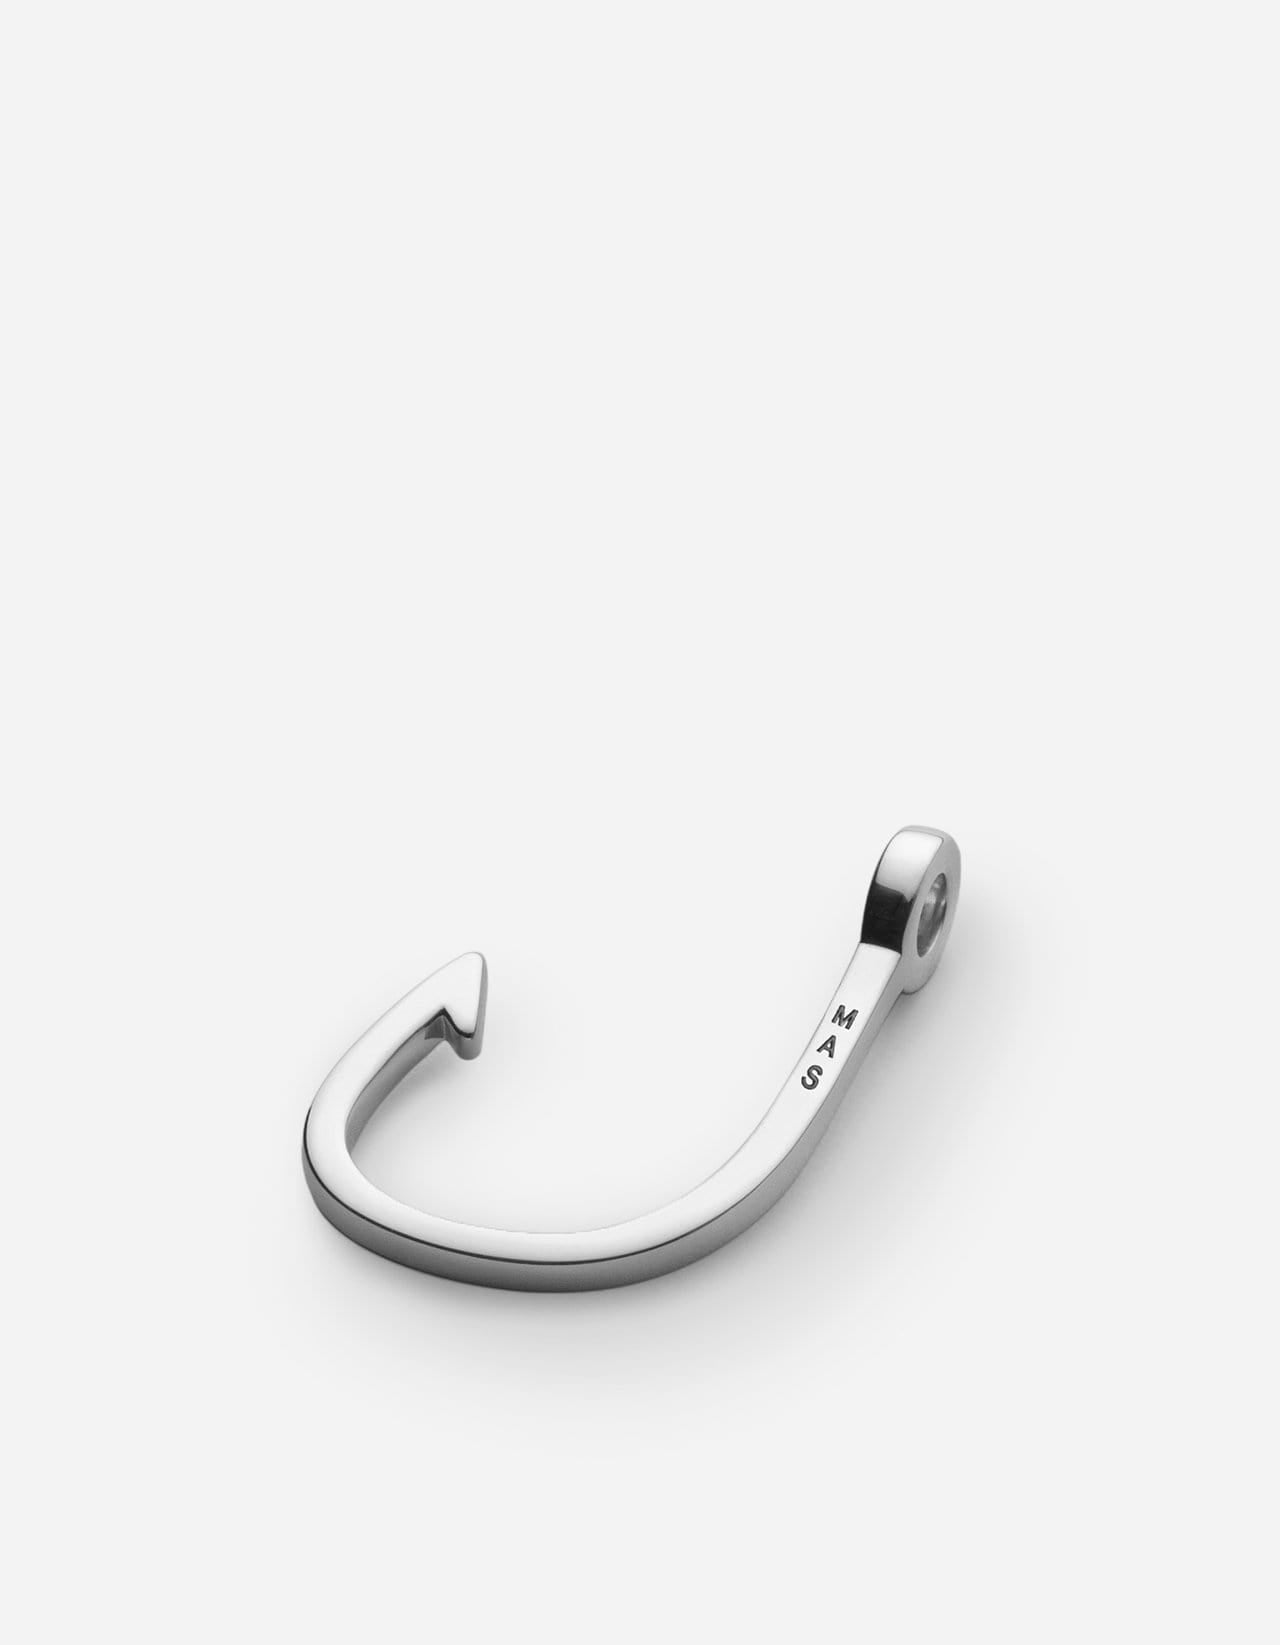 S Hook Stainless Steel Small Size - Best Price in Singapore - Jan